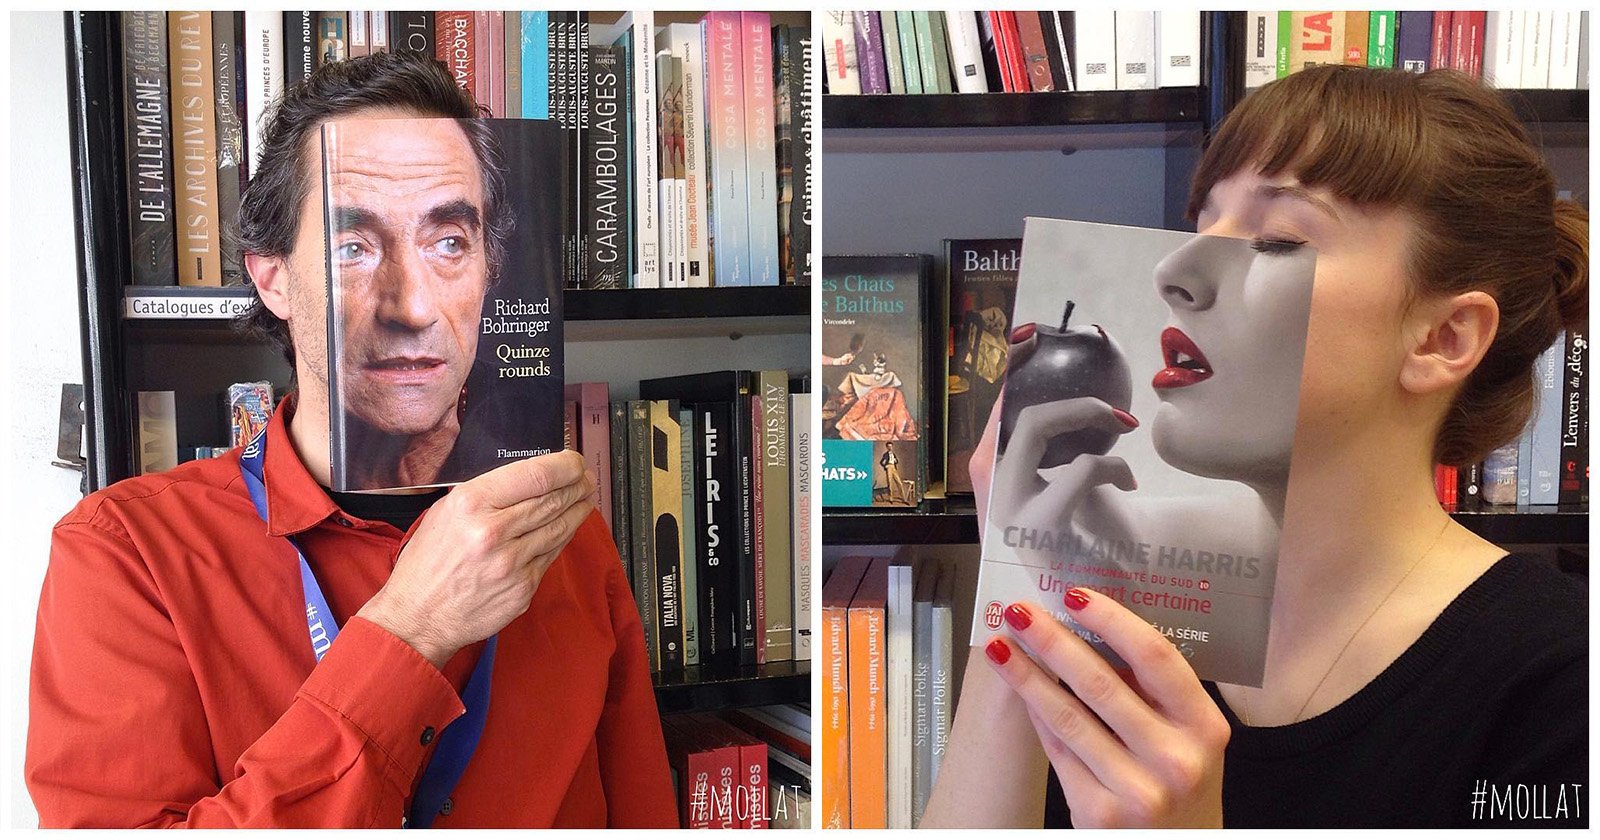 This Bookstores Creative Photo Series Matches Customers with Book Covers